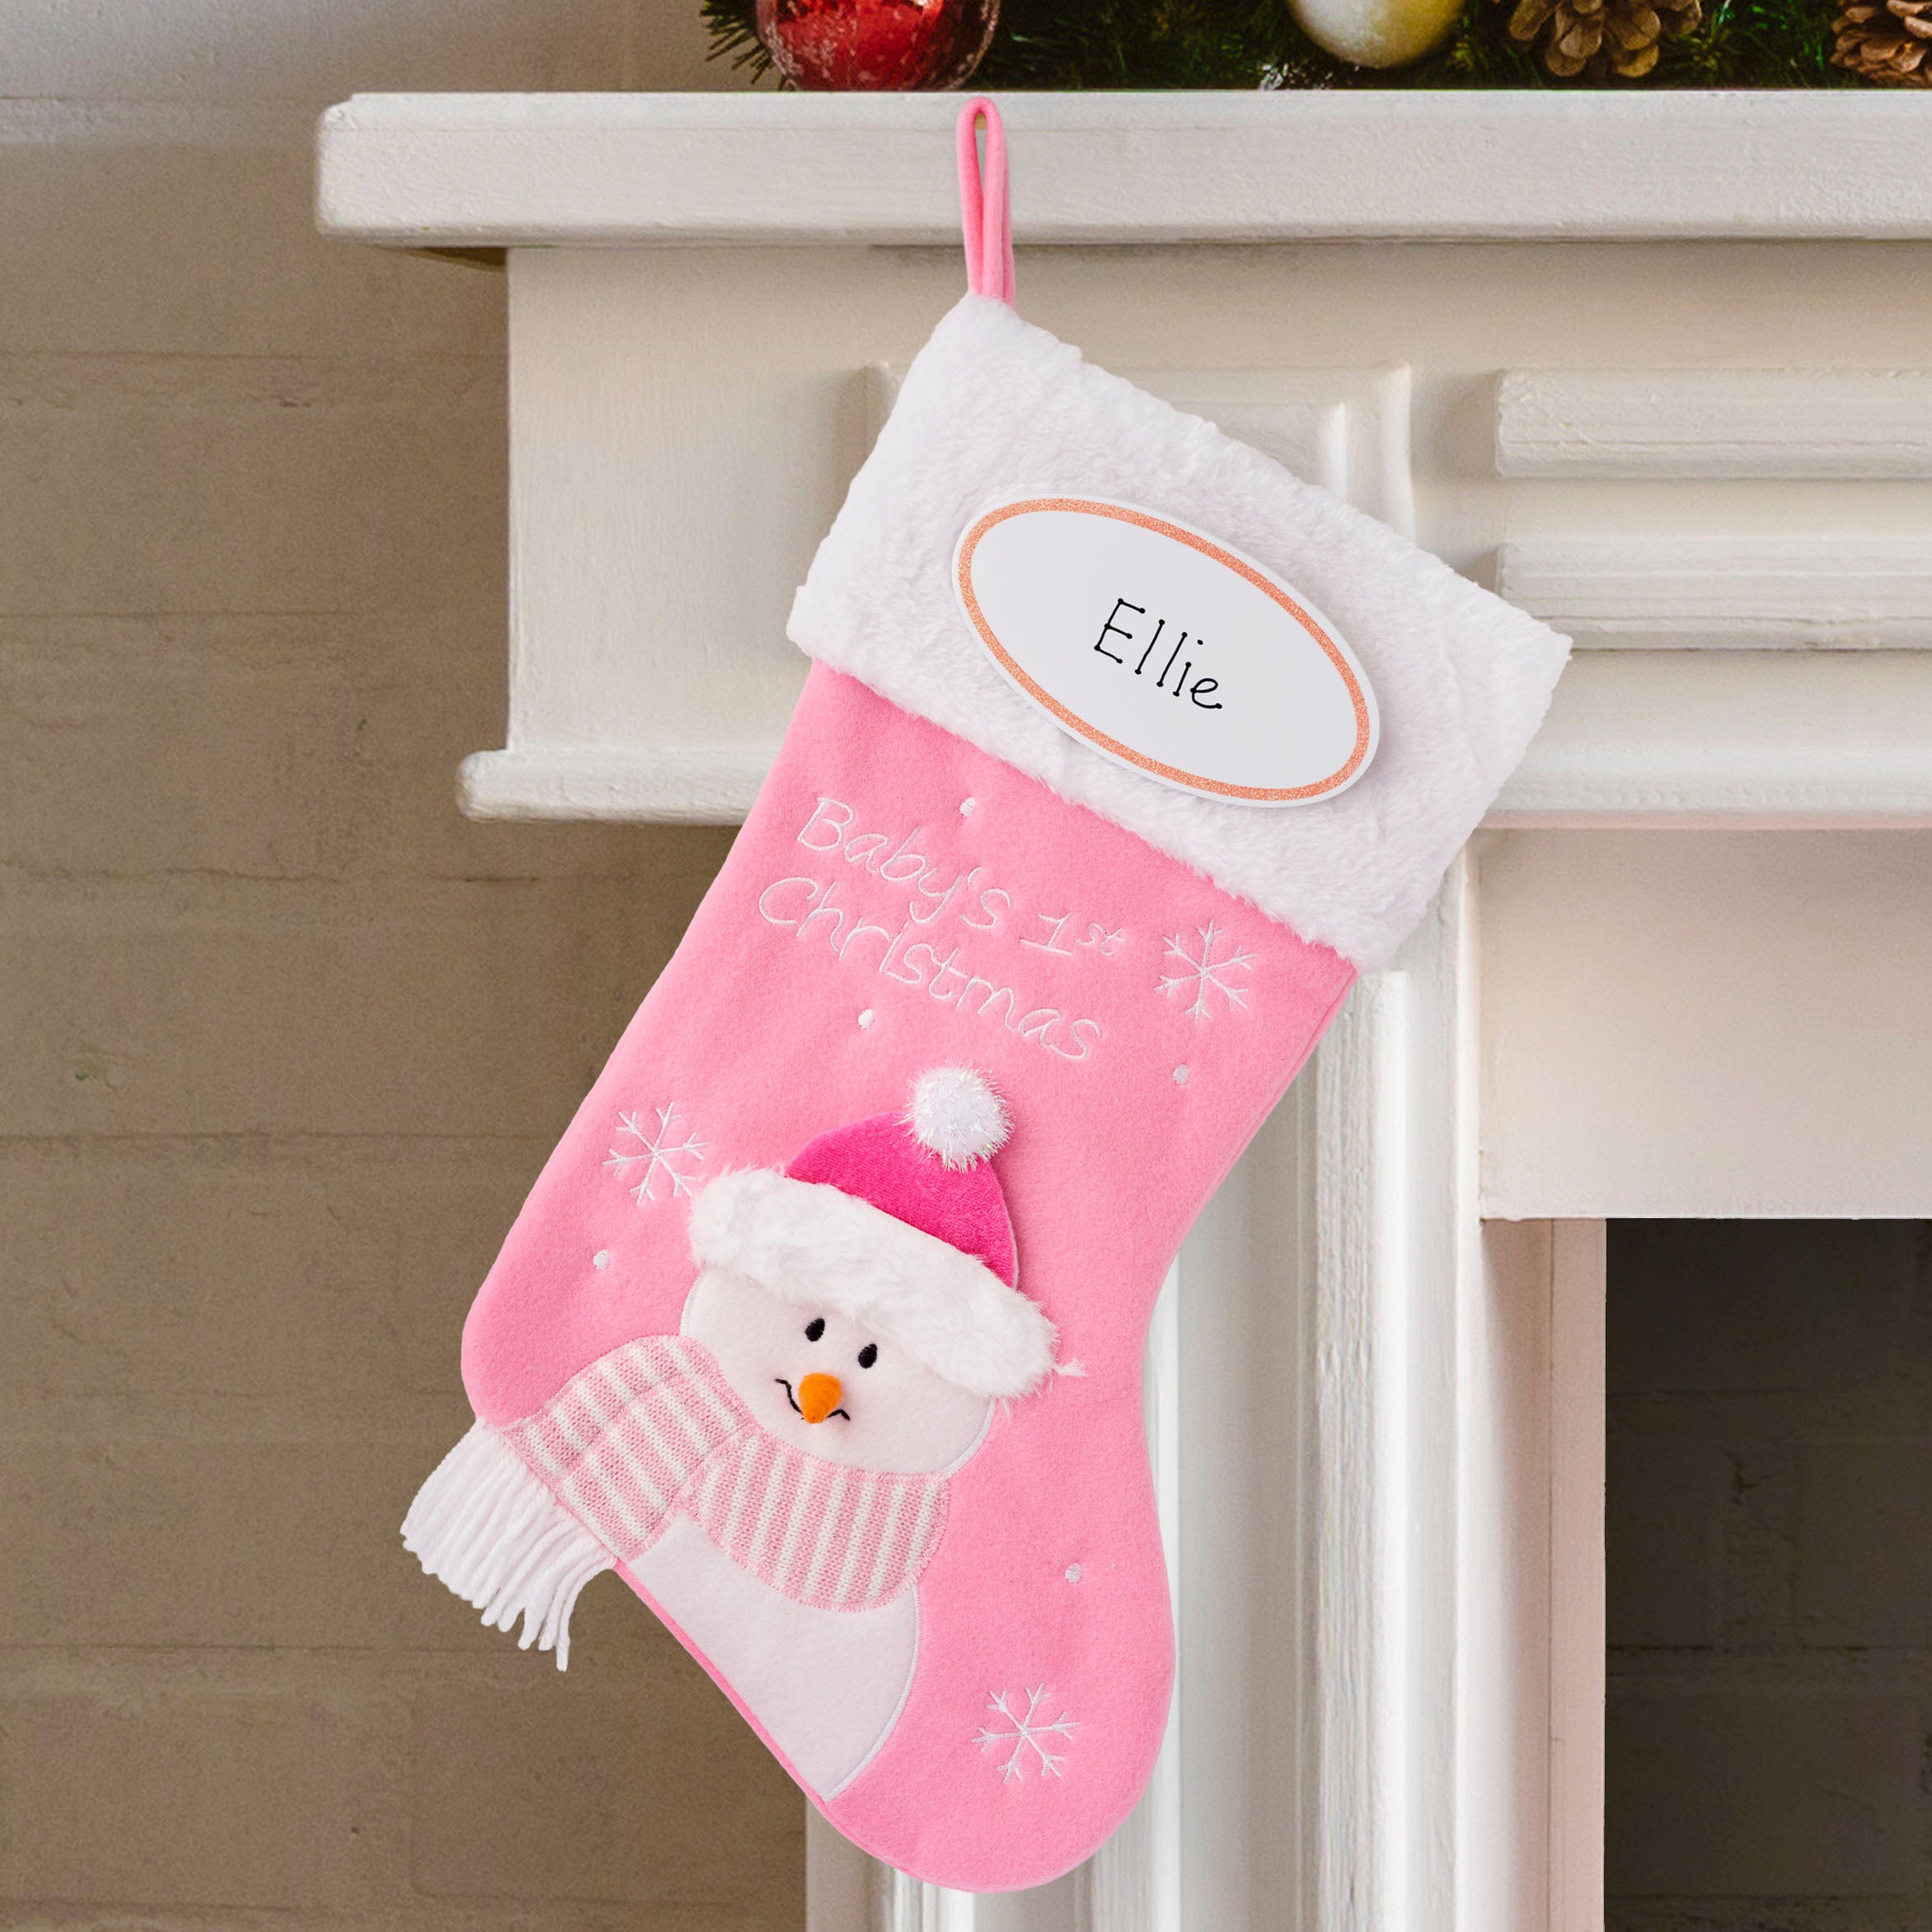 Personalised Baby's 1st Christmas Stocking